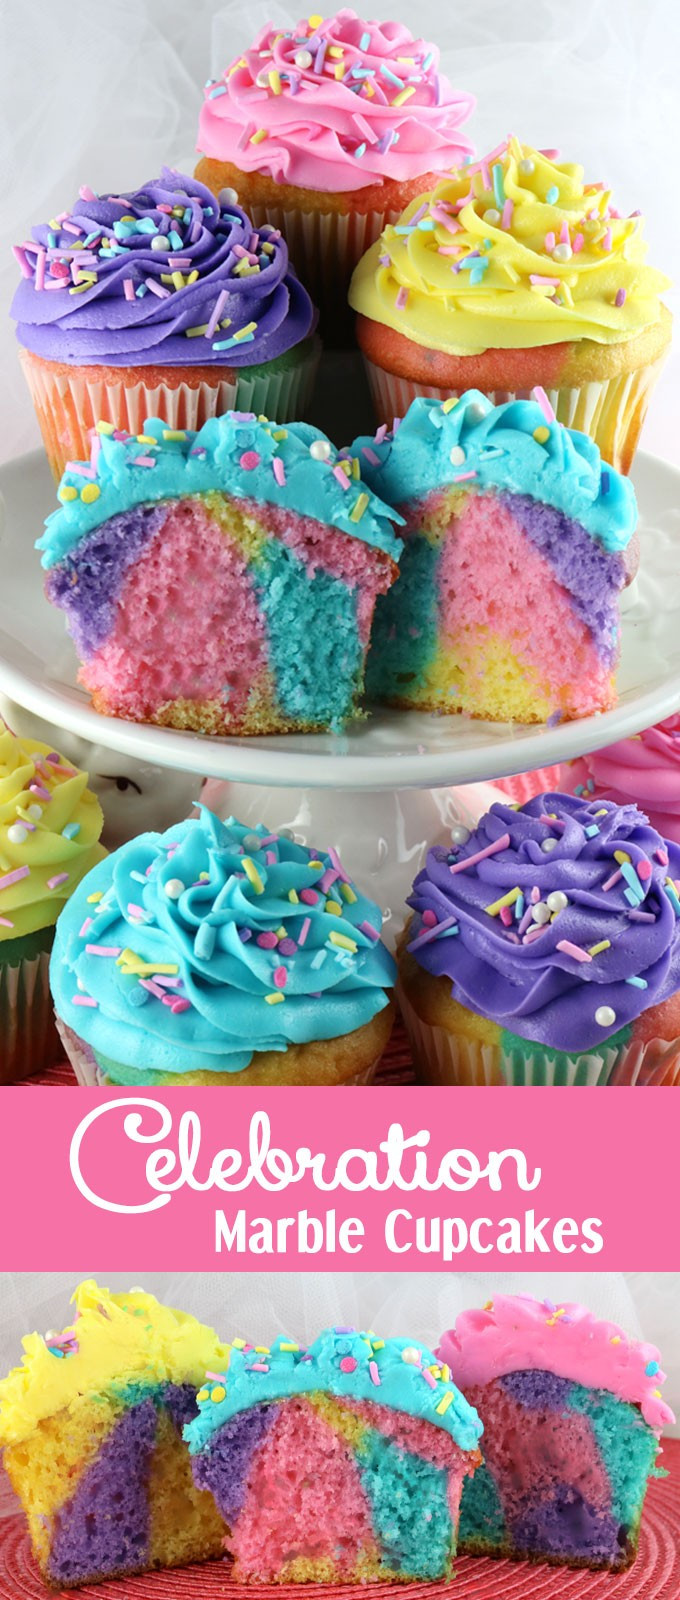 Easter Bake Sale Ideas
 The BEST Cupcake Ideas for Bake Sales and Parties